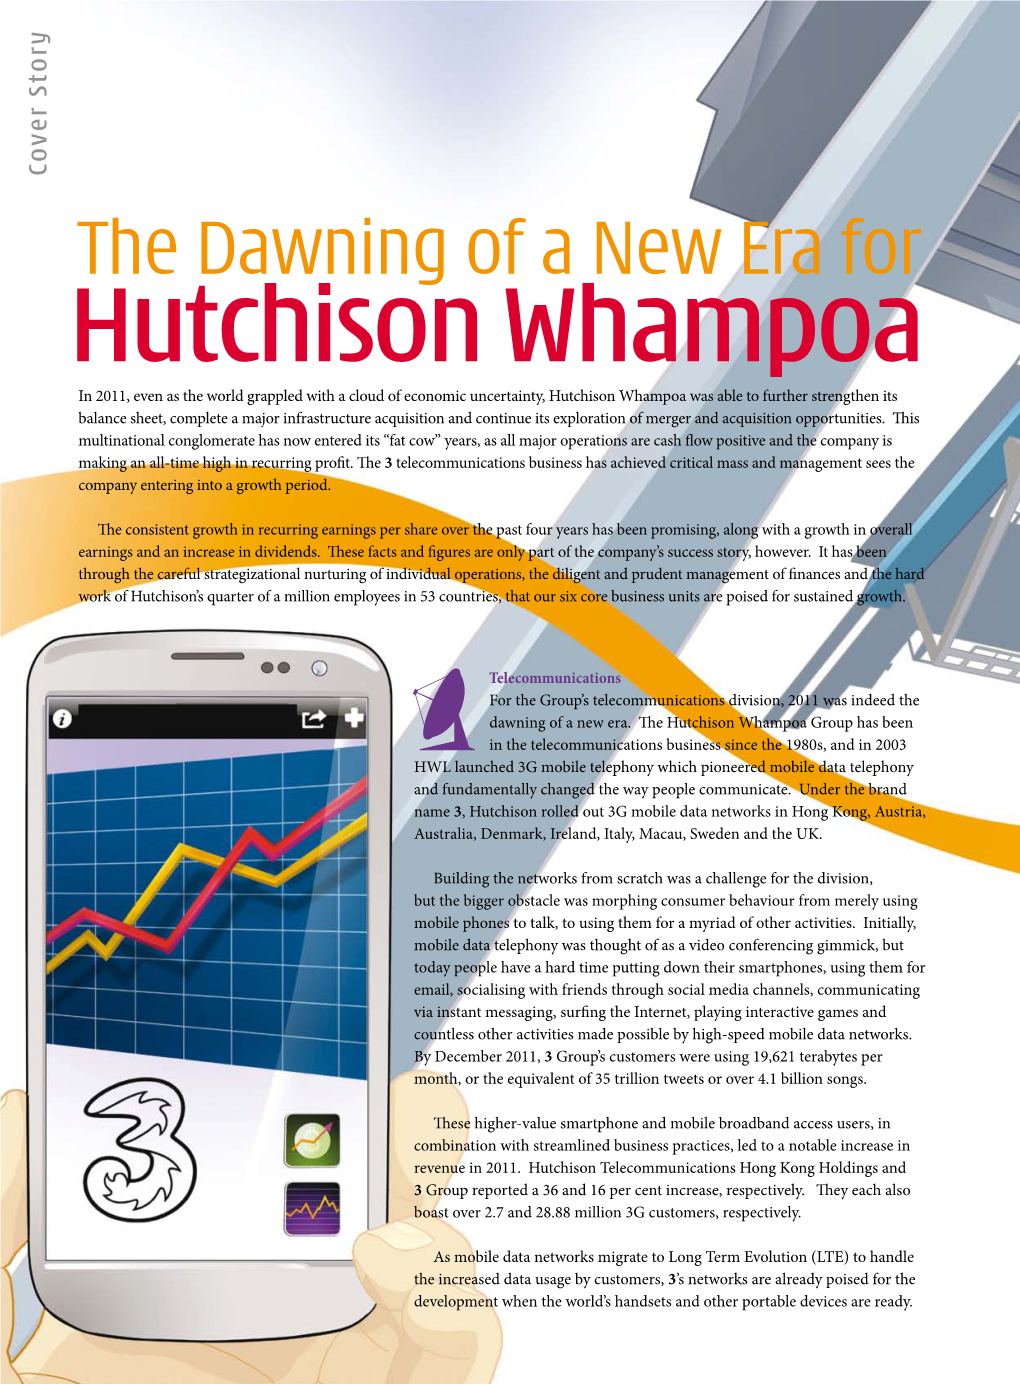 The Dawning of a New Era for Hutchison Whampoa